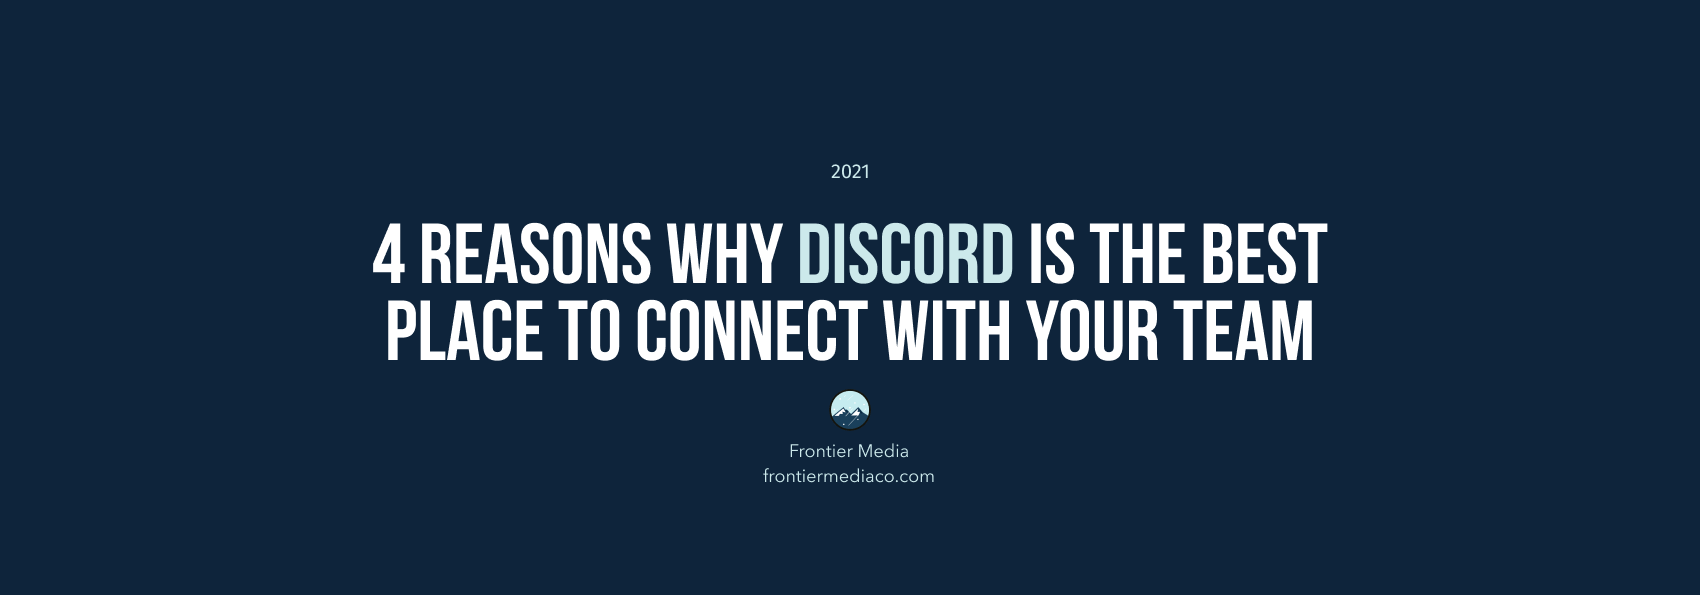 4 Reasons Why Discord is The Best Place to Connect with Your Team